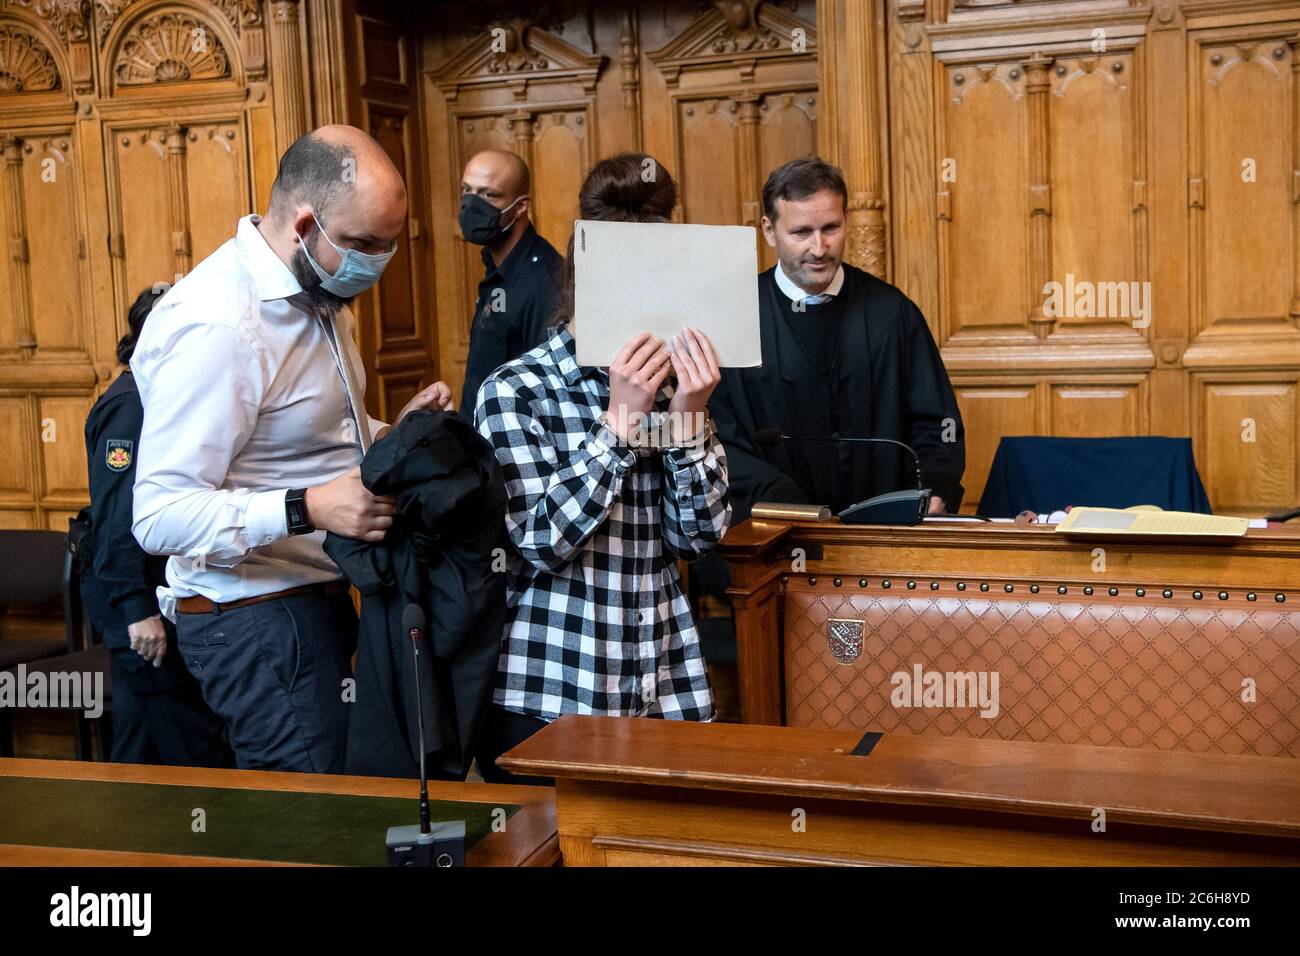 Bremen, Germany. 10th July, 2020. The defendant in the murder trial is accompanied before the start of the trial by her lawyers Mario Kroschewski (l) and Stefan Hoffmann (r) into the courtroom of the regional court. The public prosecutor accuses the 20-year-old woman of having used a sharp object to make deep and wide cuts to her 24-year-old boyfriend. The man bled to death. Credit: Sina Schuldt/dpa/Alamy Live News Stock Photo